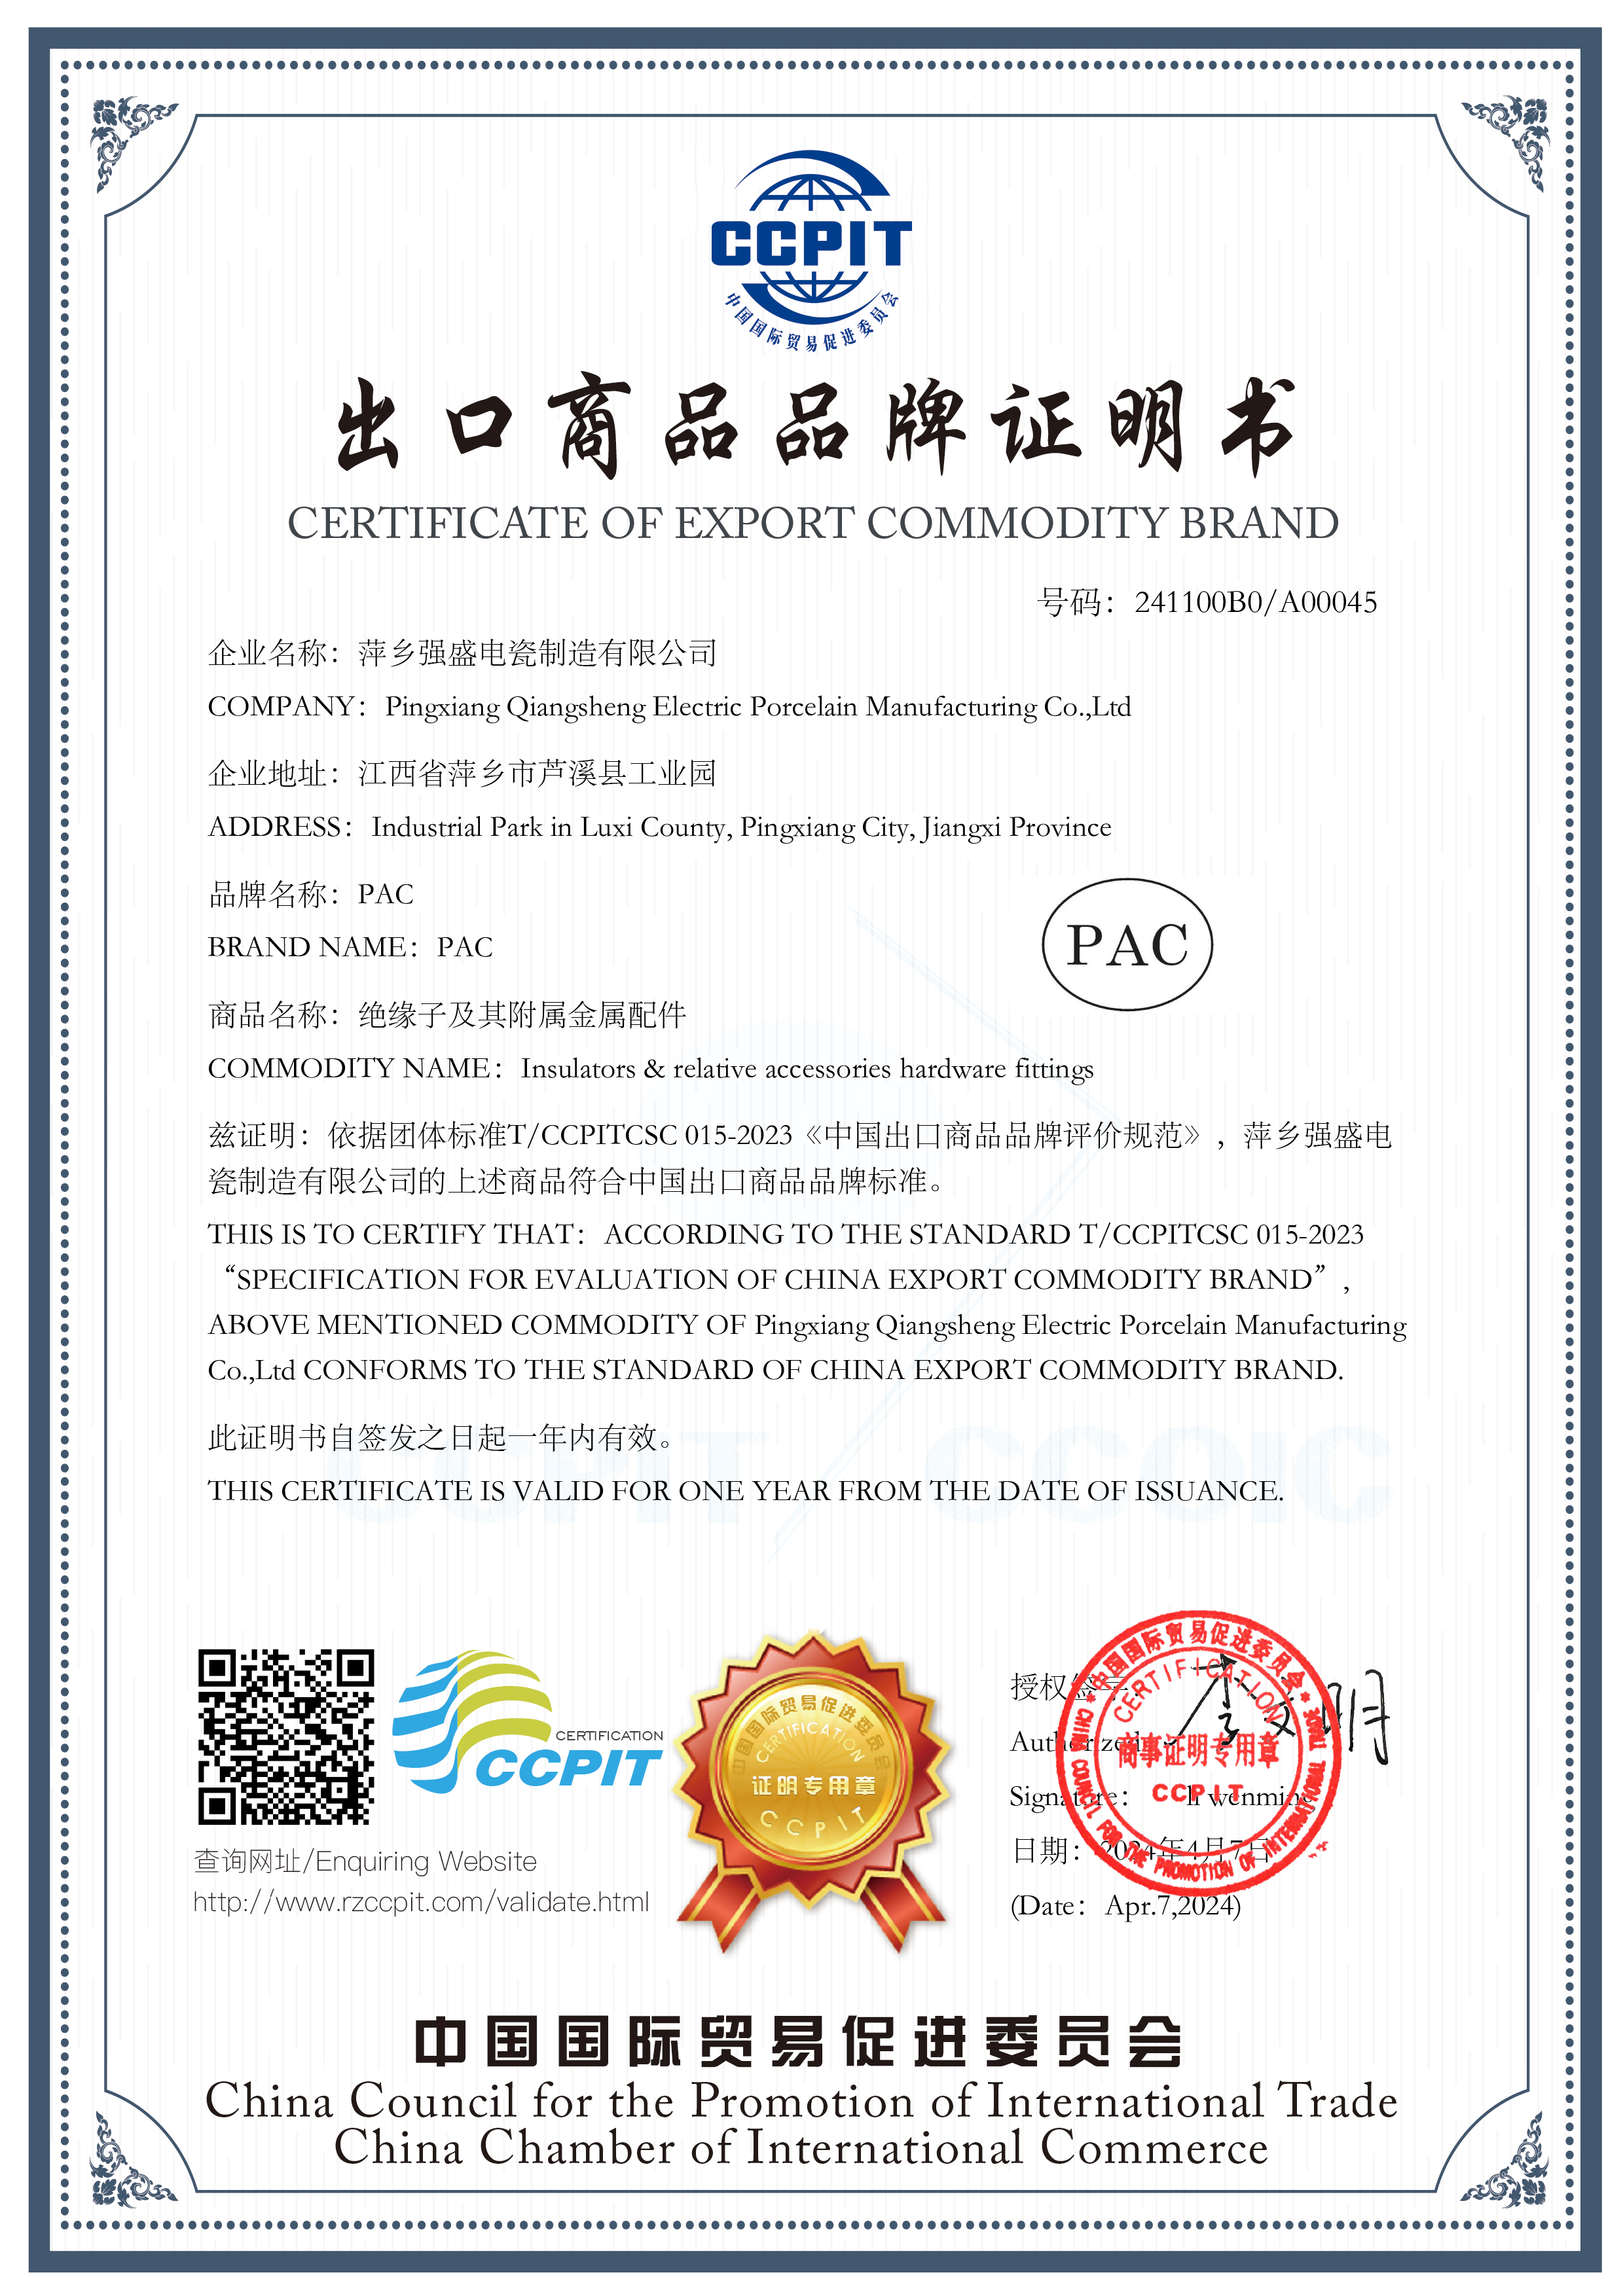 Good news! Qiangsheng Electric Porcelain has been awarded the first Chinese export product brand certificate in Pingxiang City